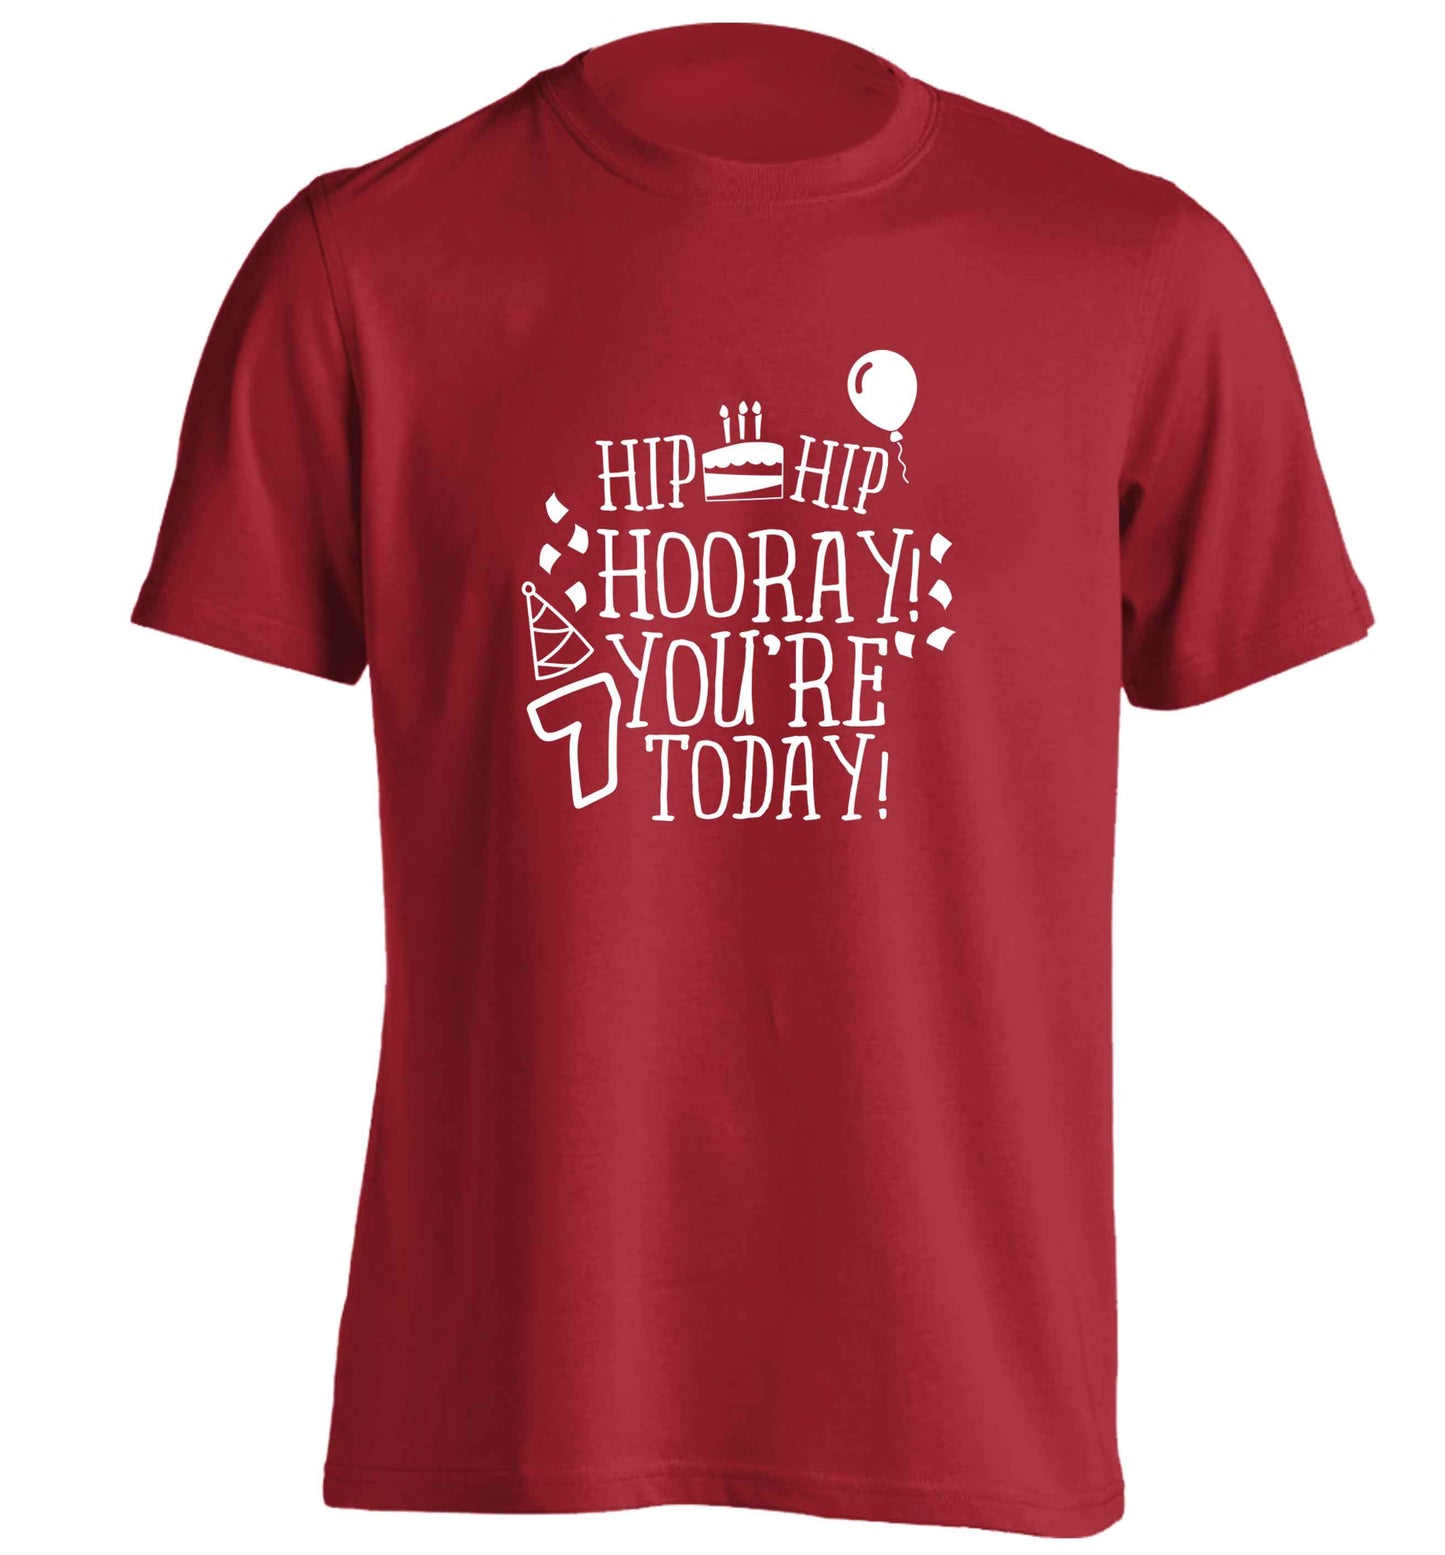 Hip hip hooray you're seven today! adults unisex red Tshirt 2XL